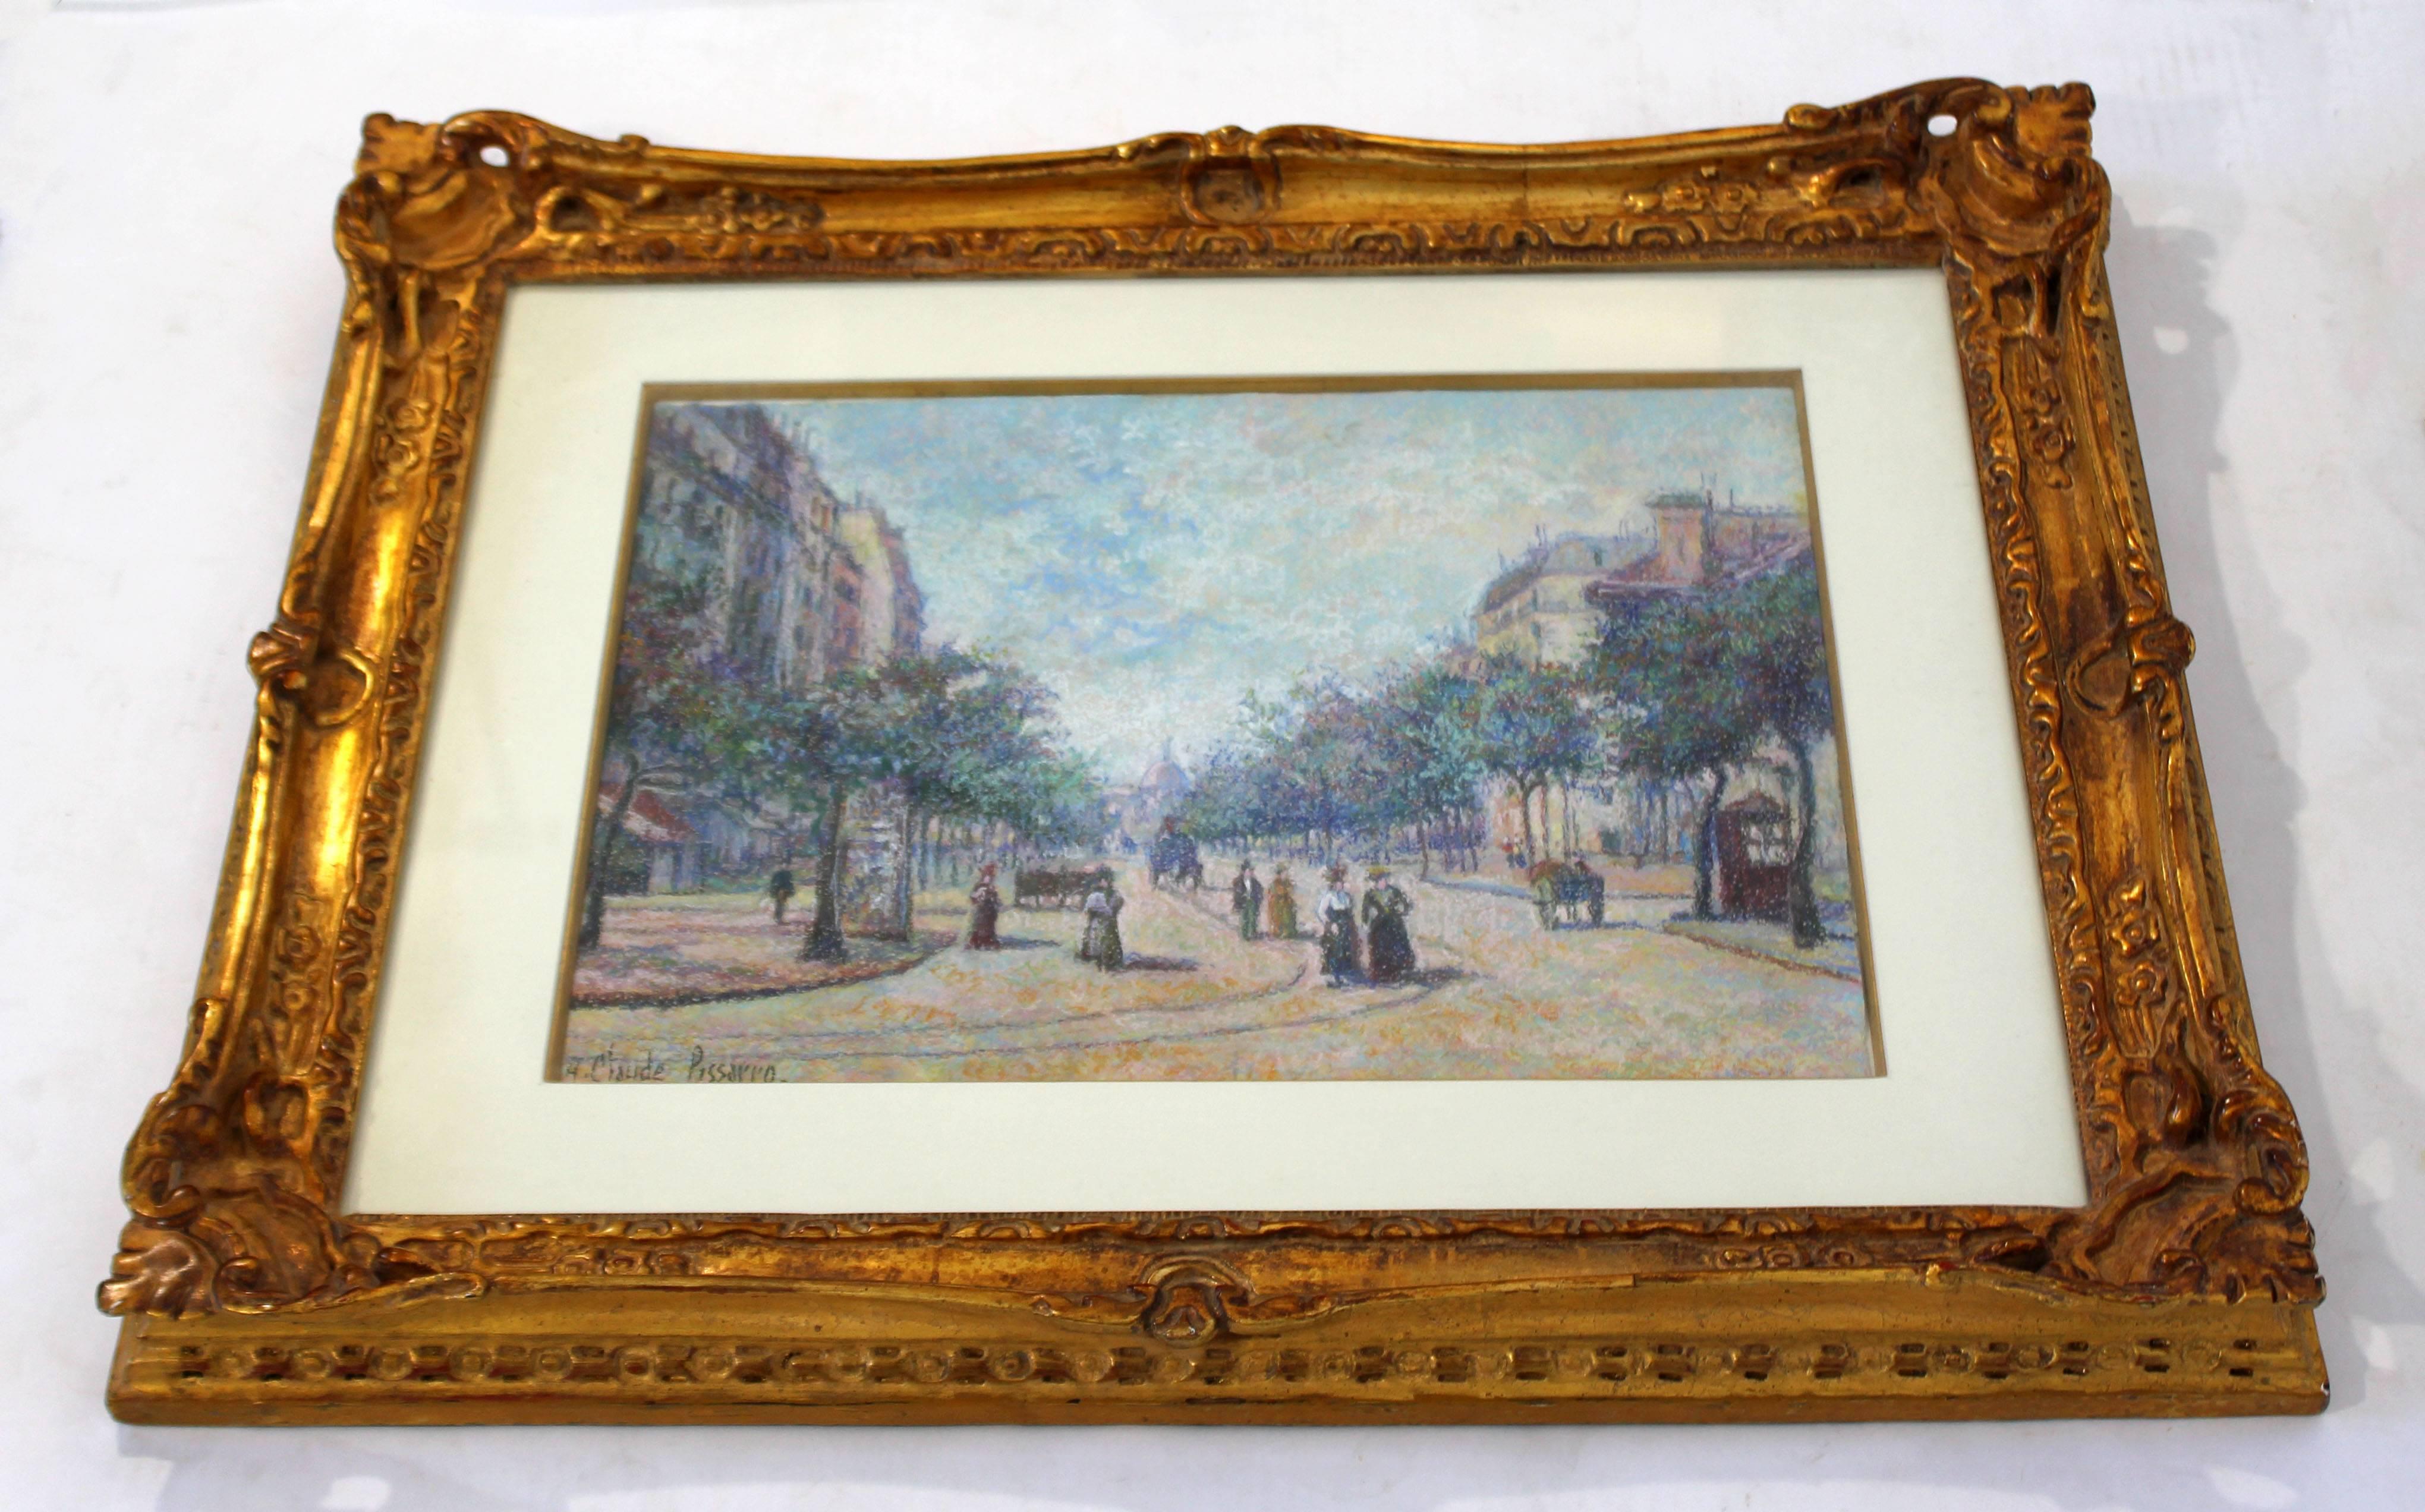 For your consideration is a framed and signed pastel done in pointillism style by H. Claude Pissarro. In excellent condition. The dimensions of the frame are 30